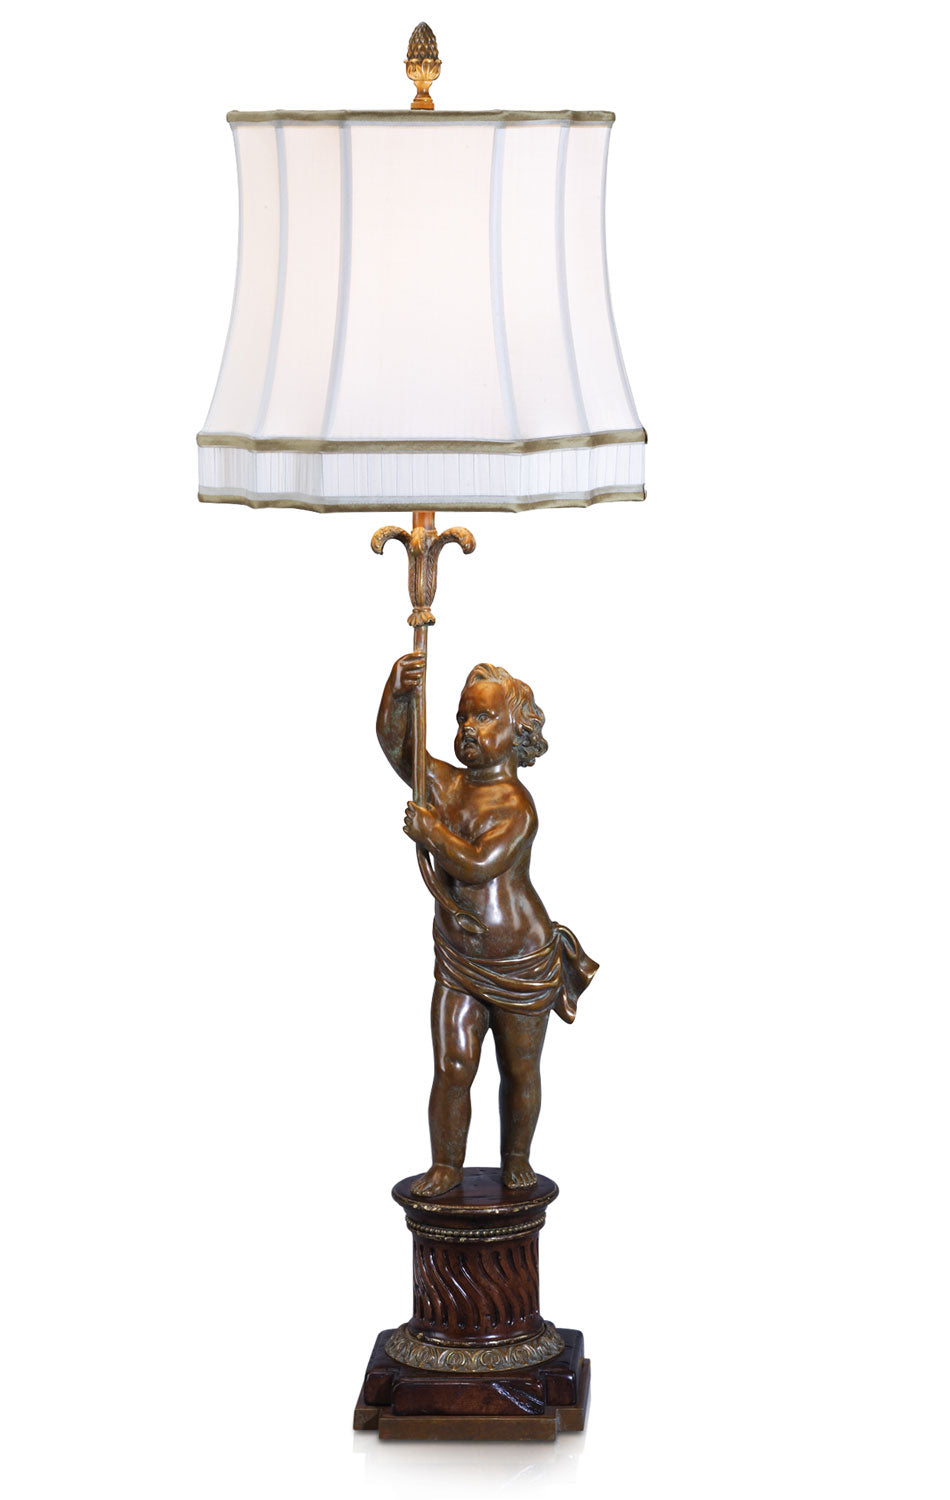 An antiqued brass table lamp